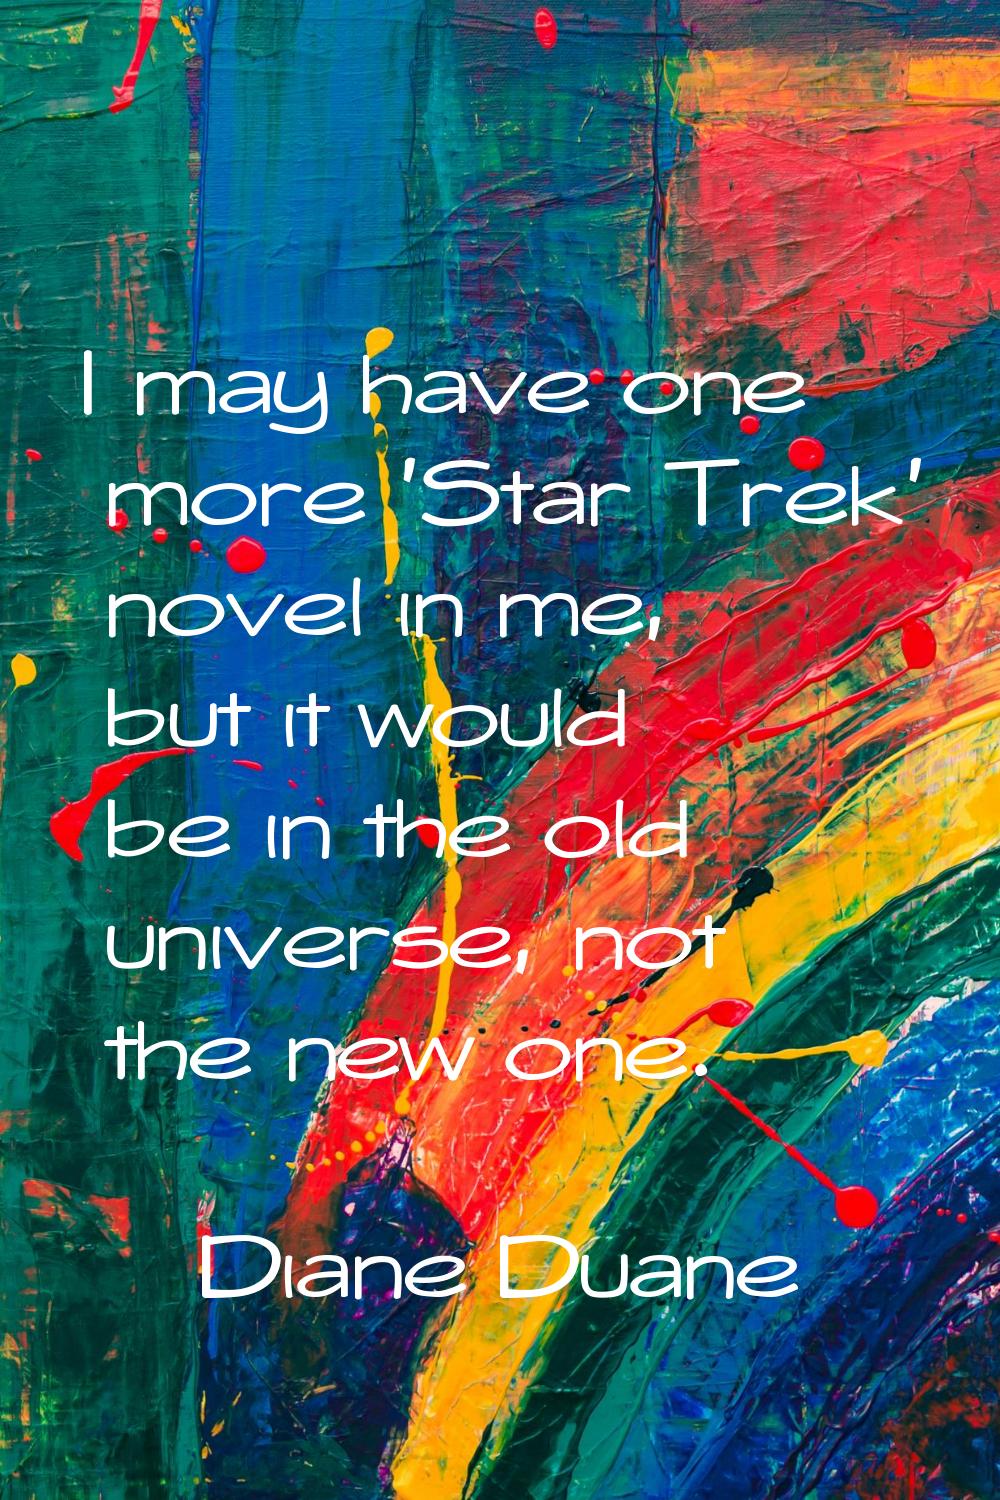 I may have one more 'Star Trek' novel in me, but it would be in the old universe, not the new one.